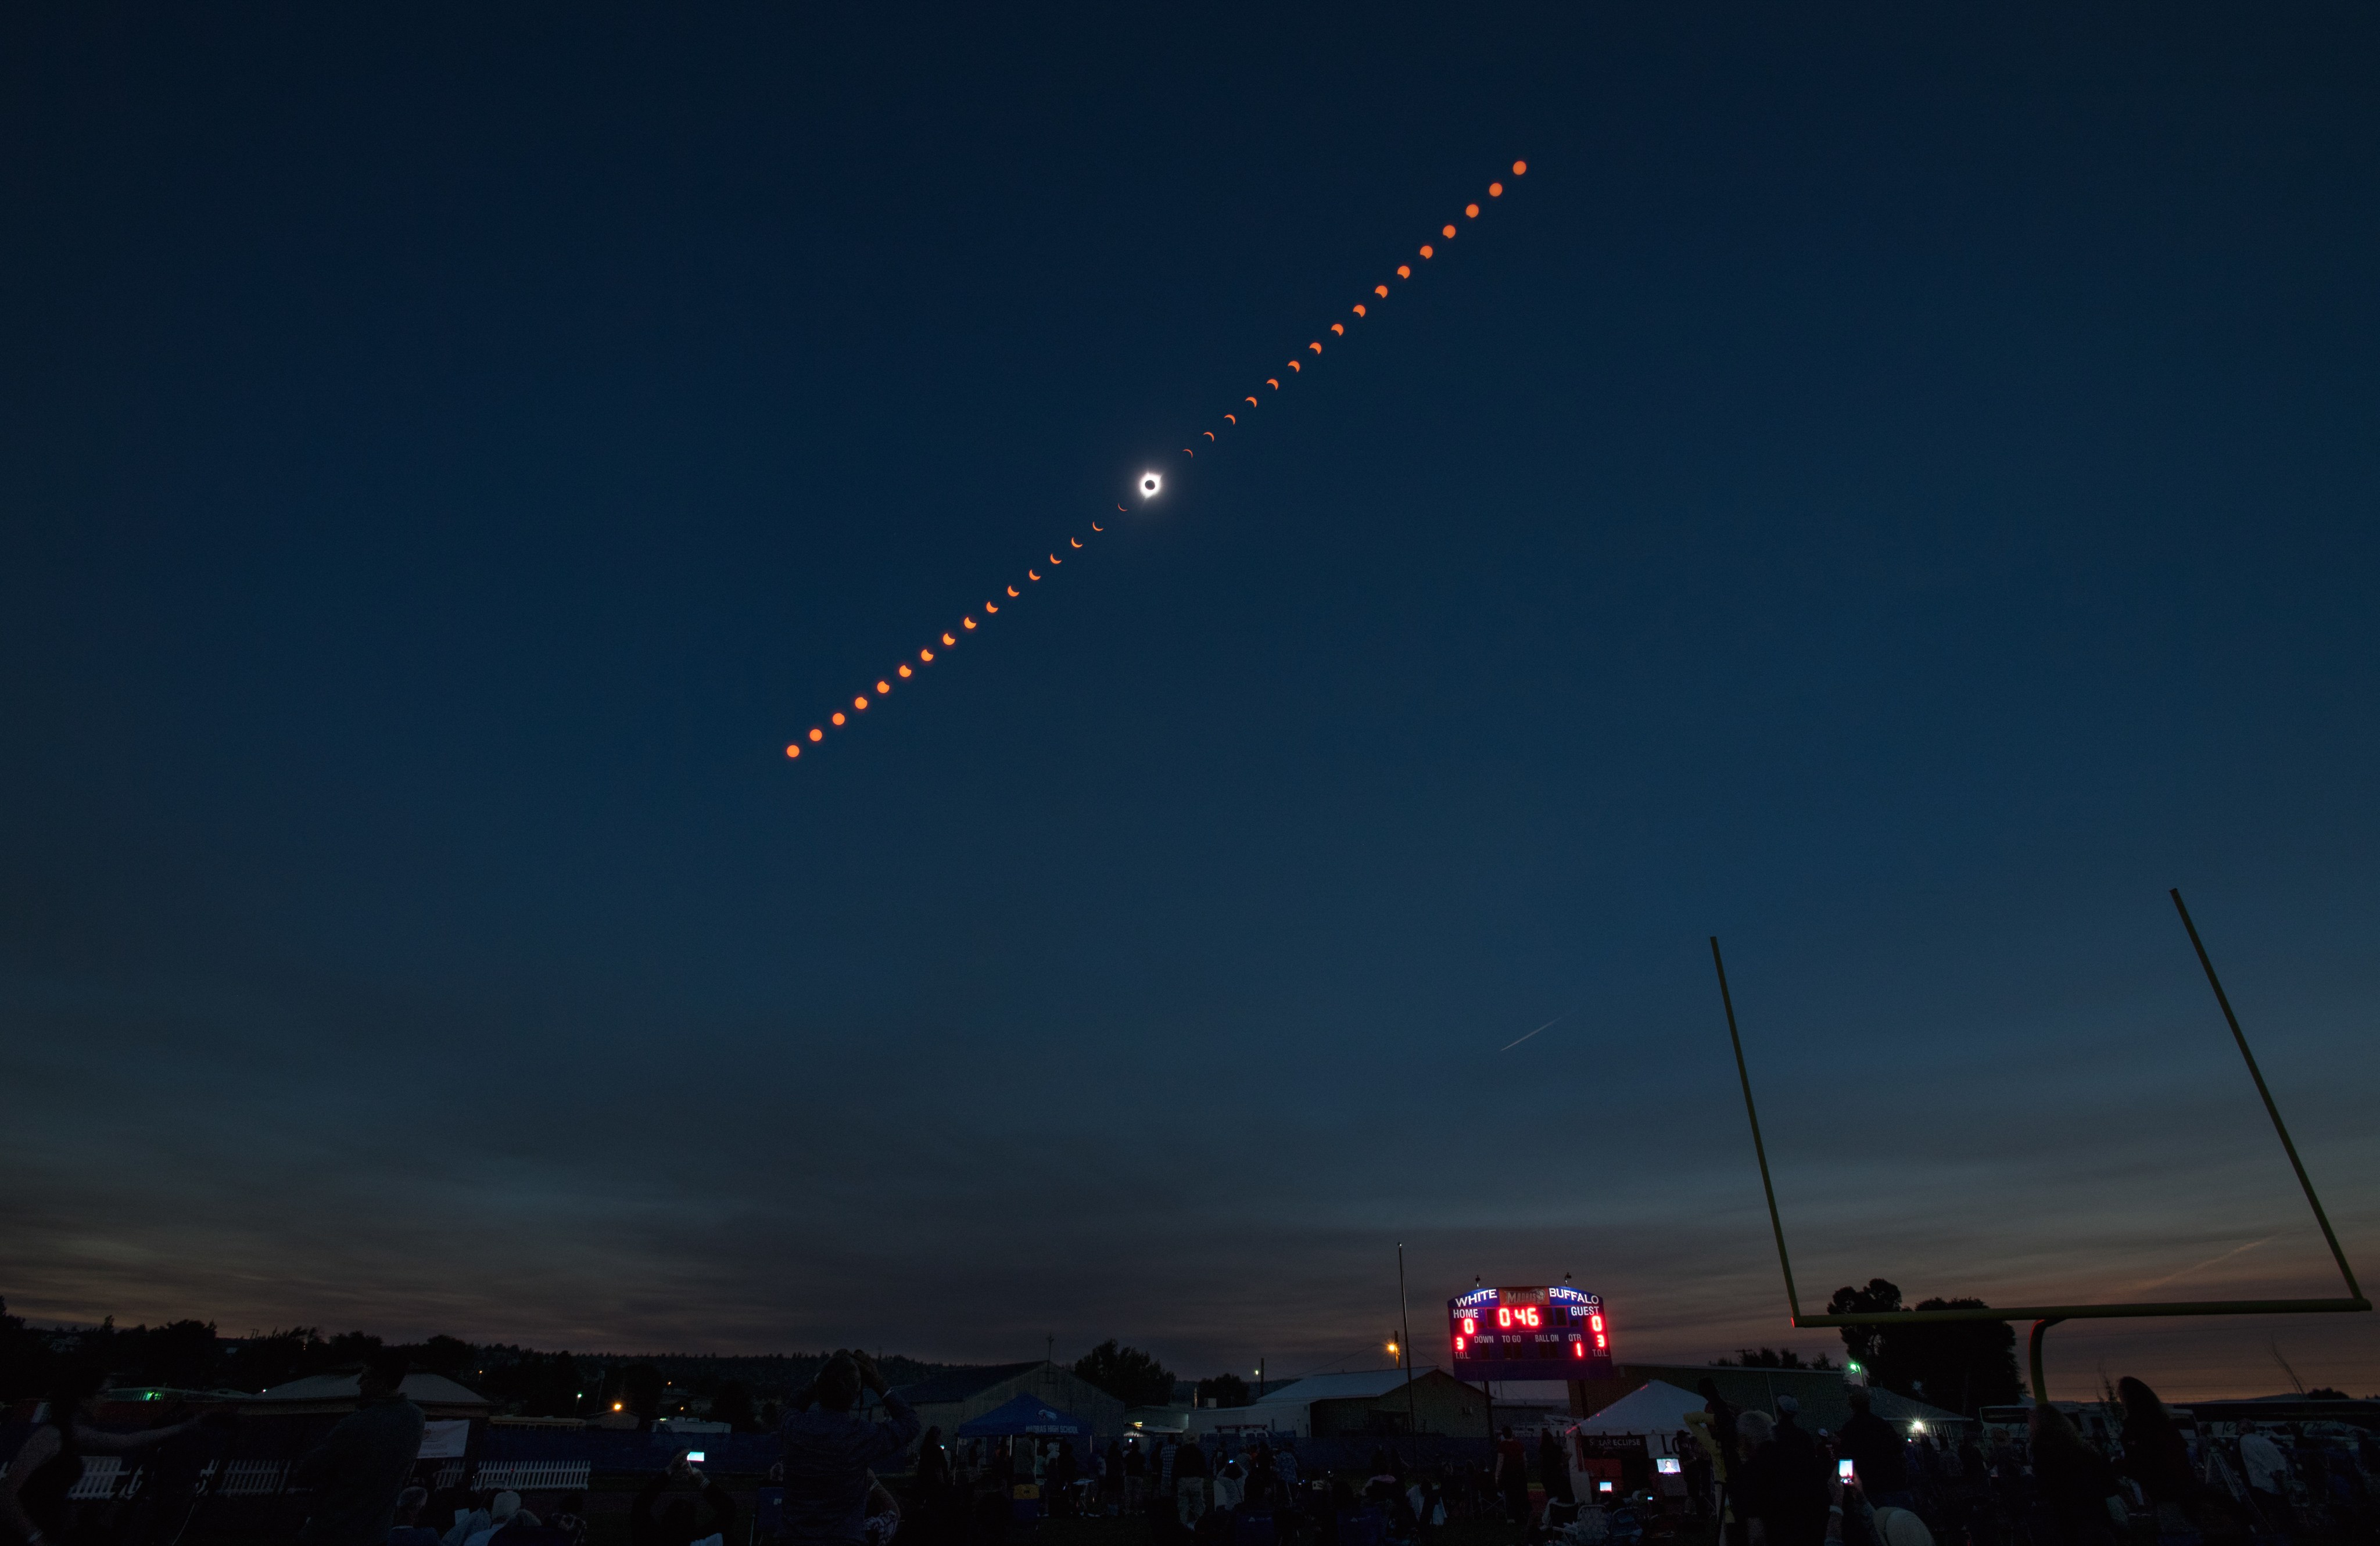 A timelapse shot of a total solar eclipse against a dark sky. The several phases of the eclipse show up like a dotted line across the sky, with an image of the total solar eclipse at the center.